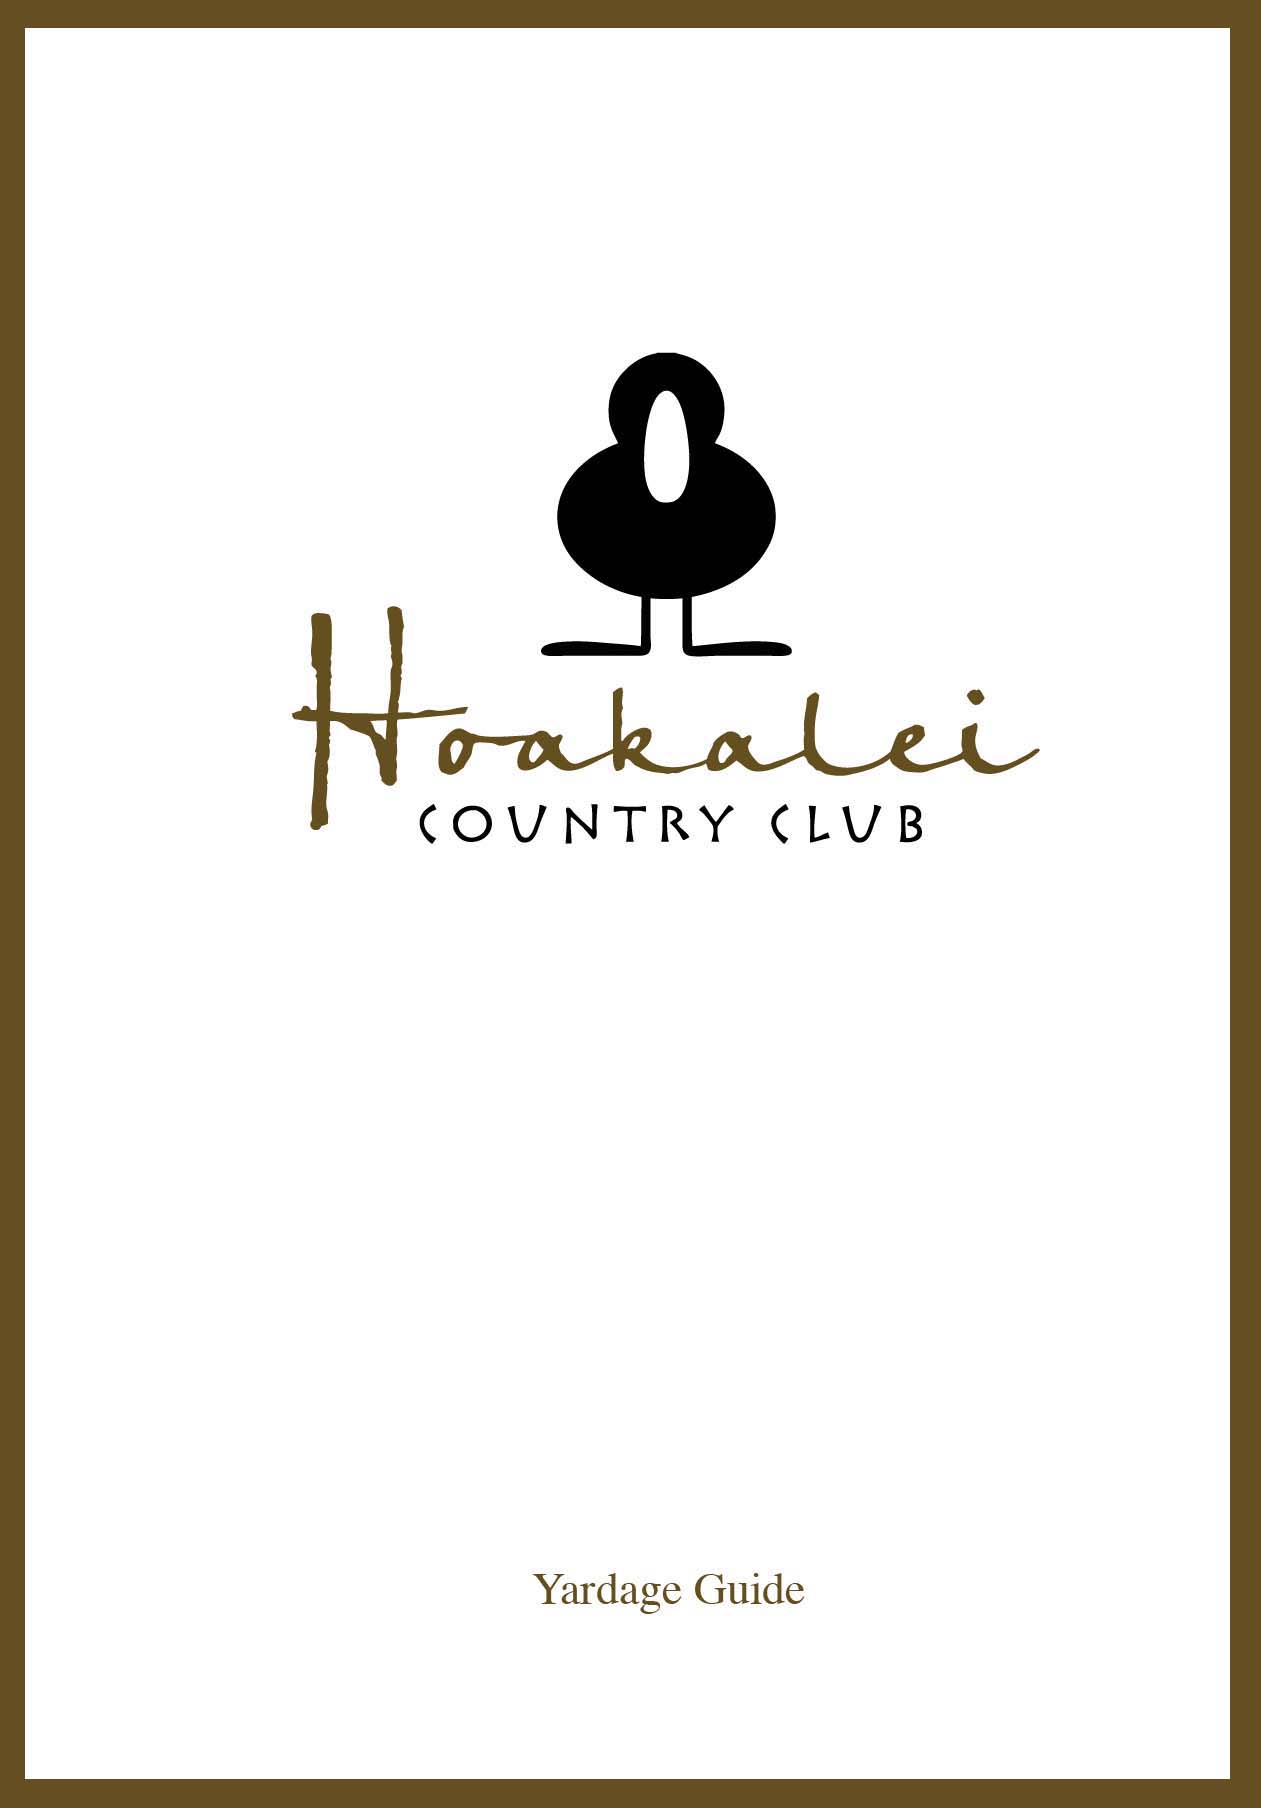 Hoakalei Country Club – Full Color